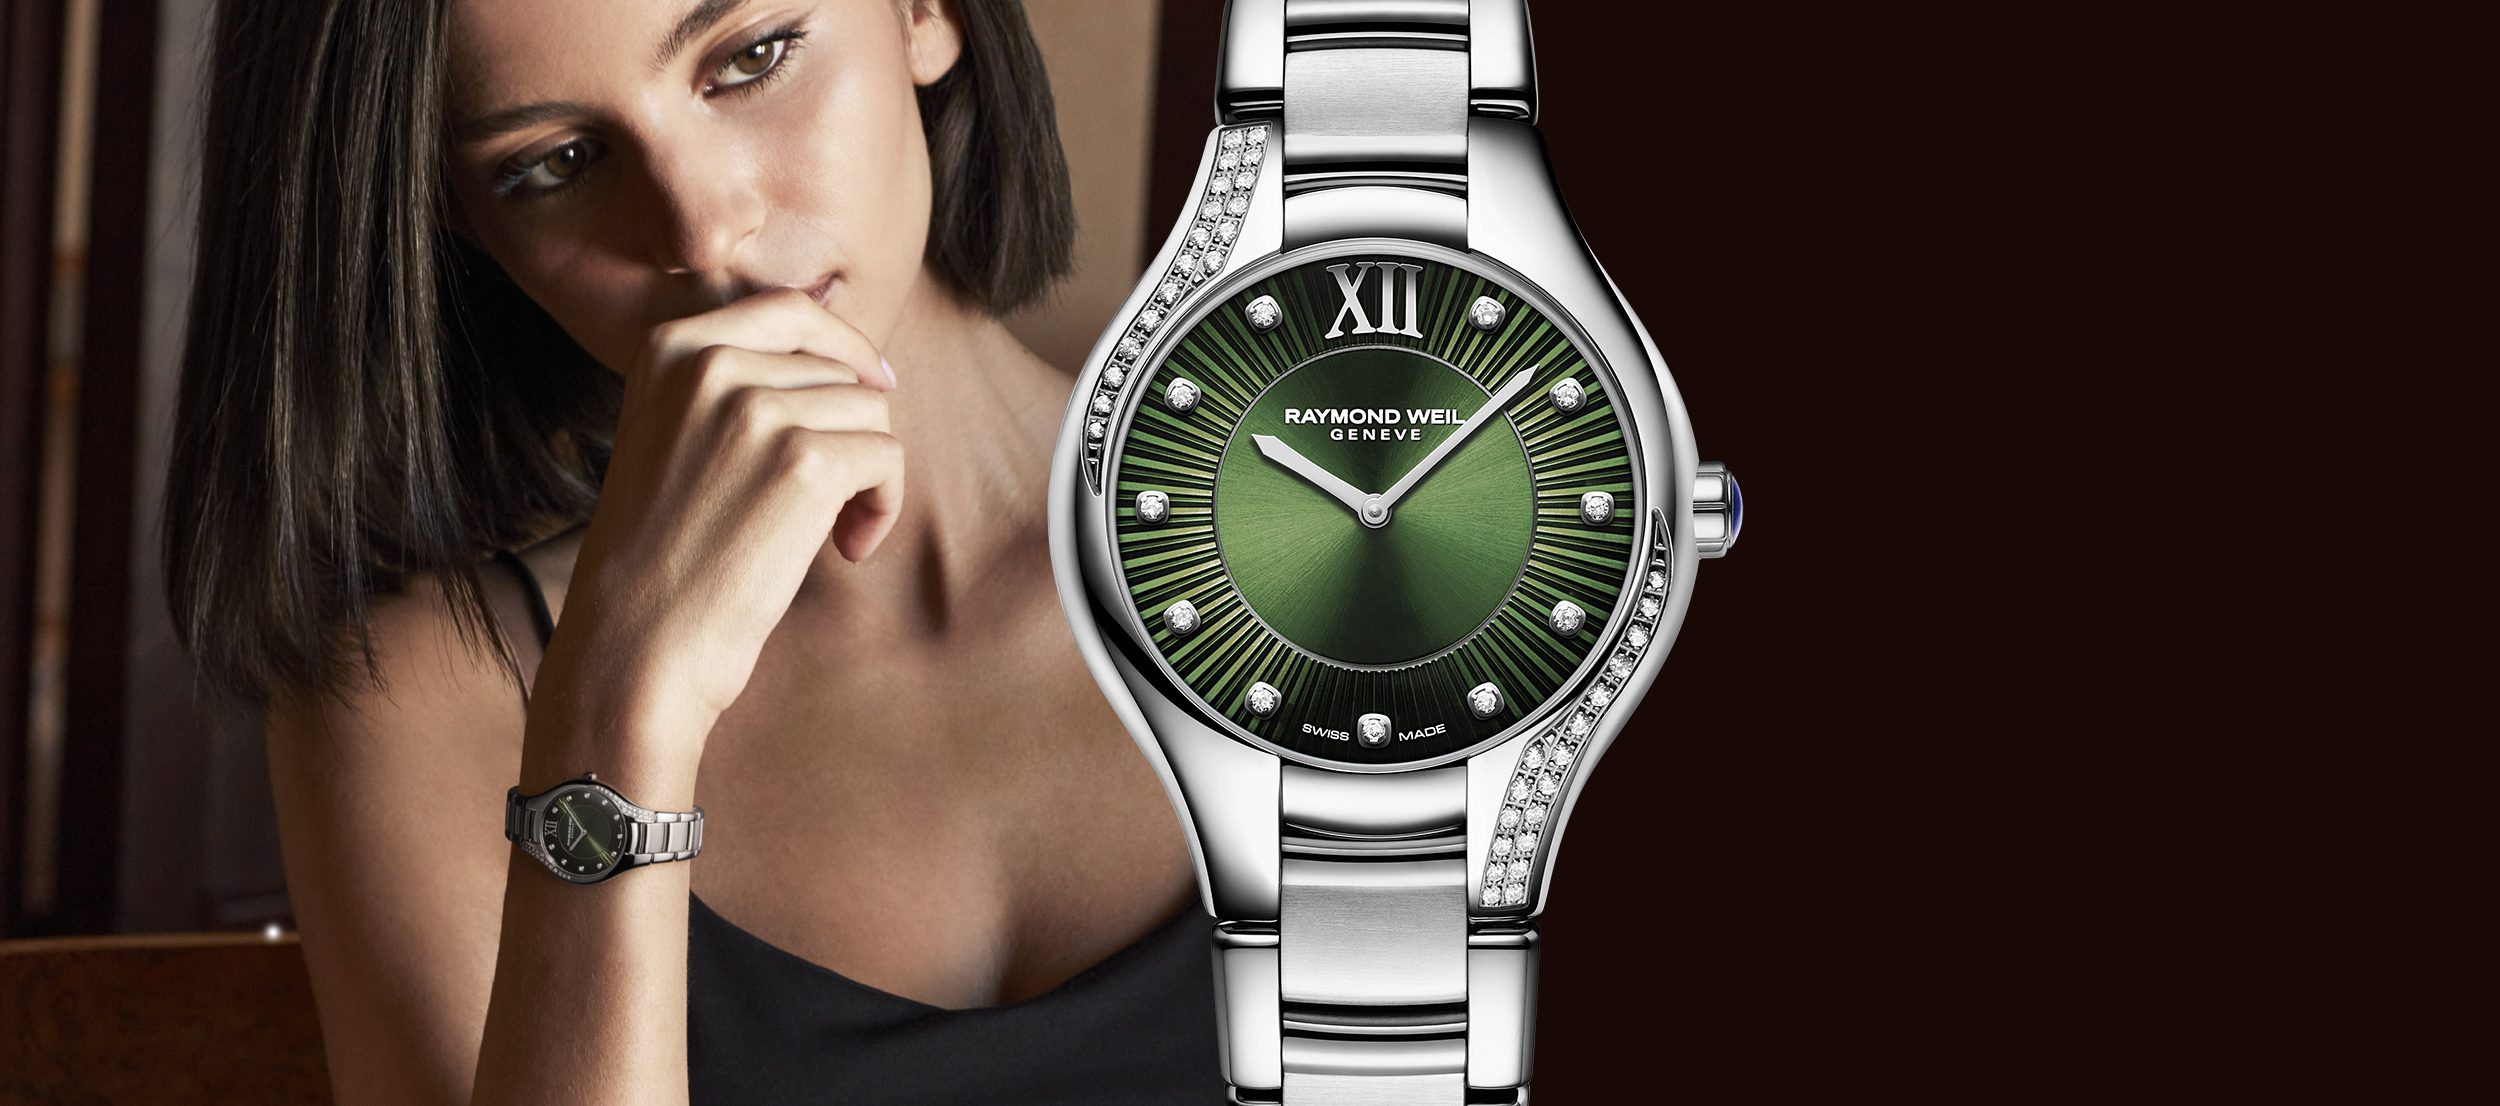 5132-S1S-52181_product_page_banner Noemia Collection RAYMOND WEIL